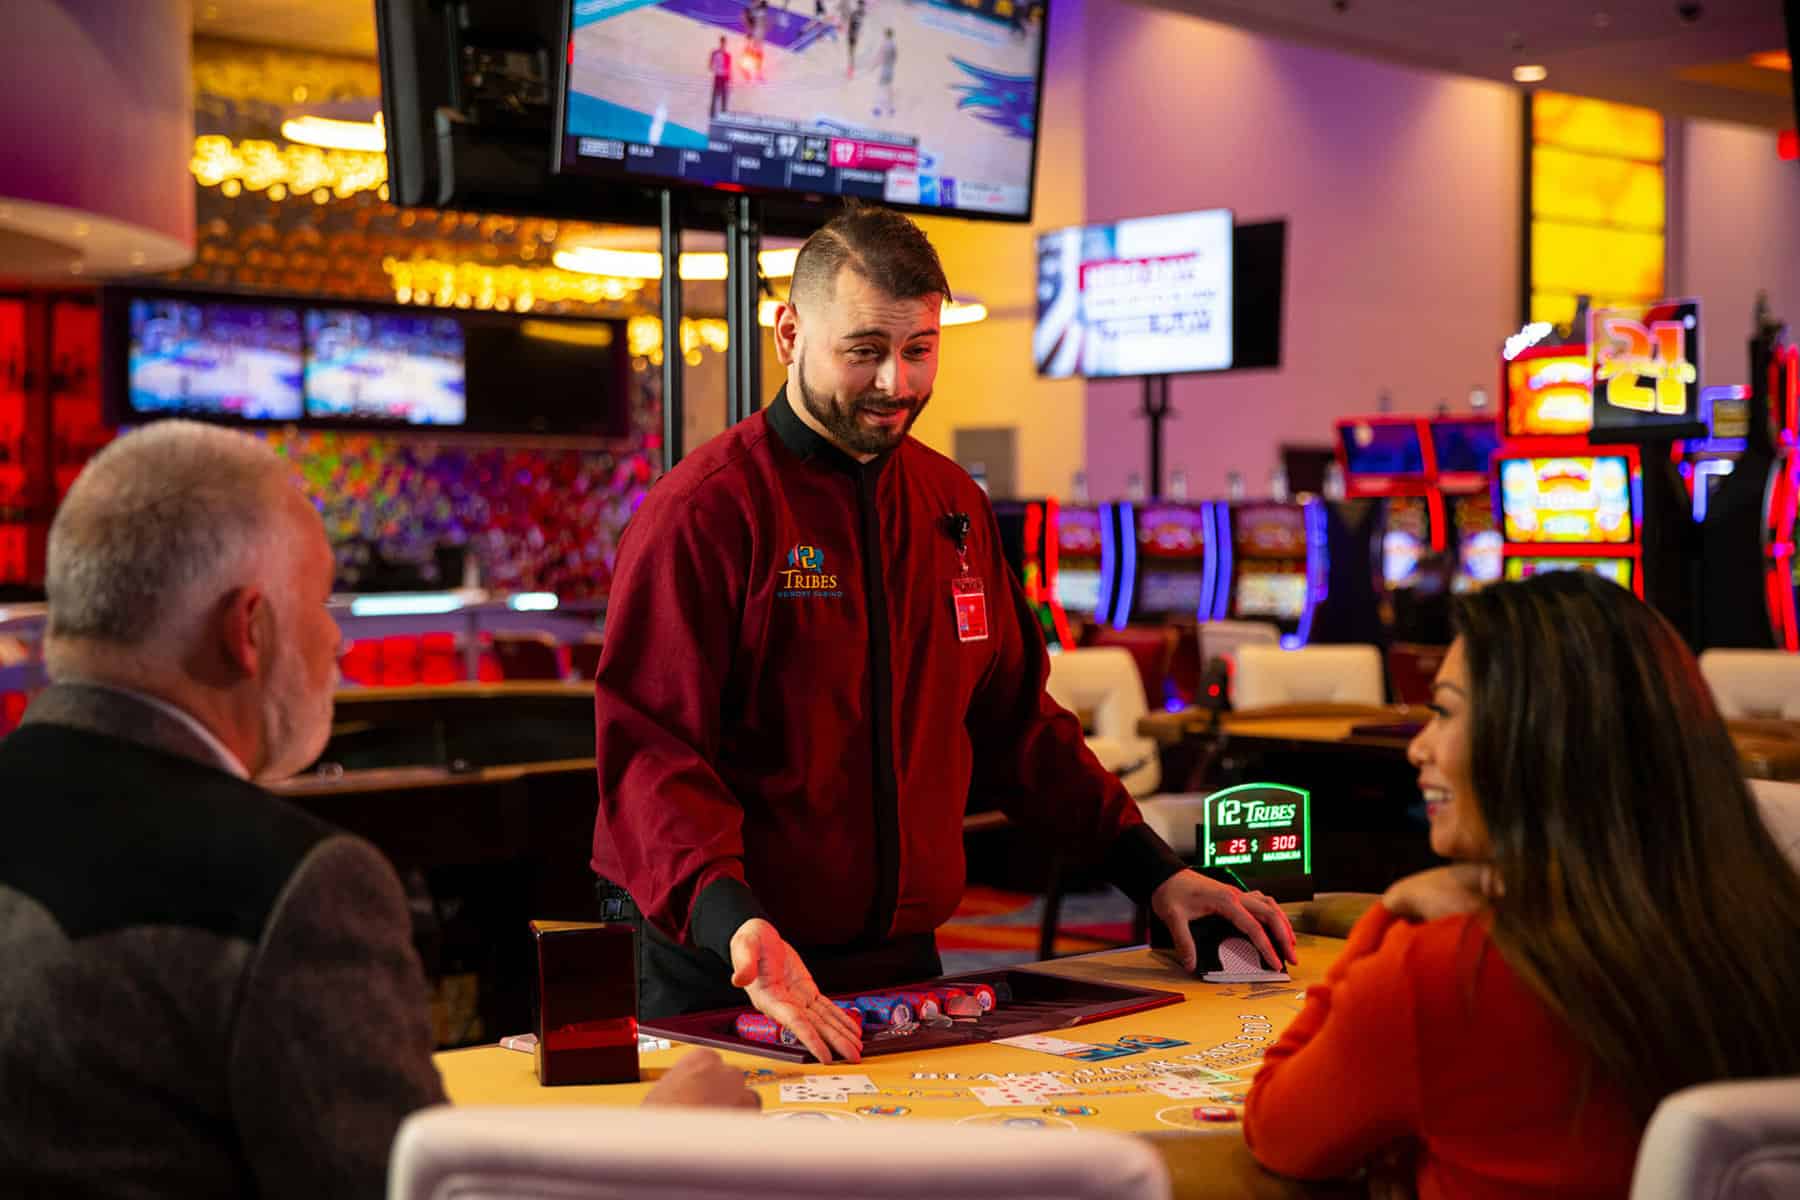 12 tribes casino events